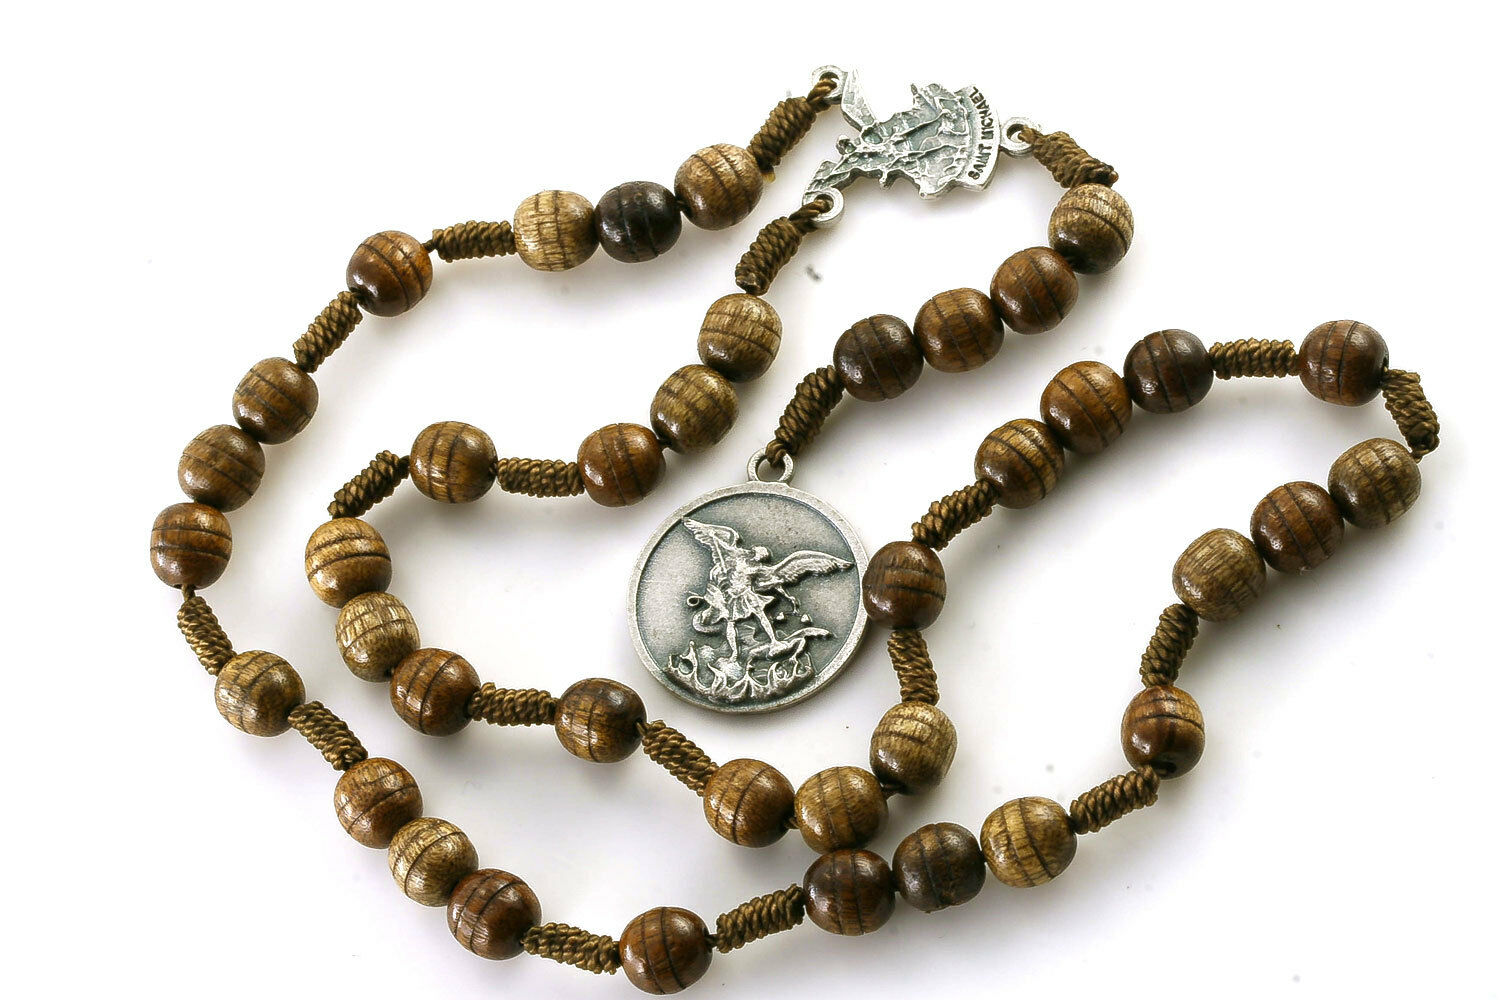 Brown Carved Wood St Saint Michael Archangel Rosary Beads Chaplet 6m Strong Cord